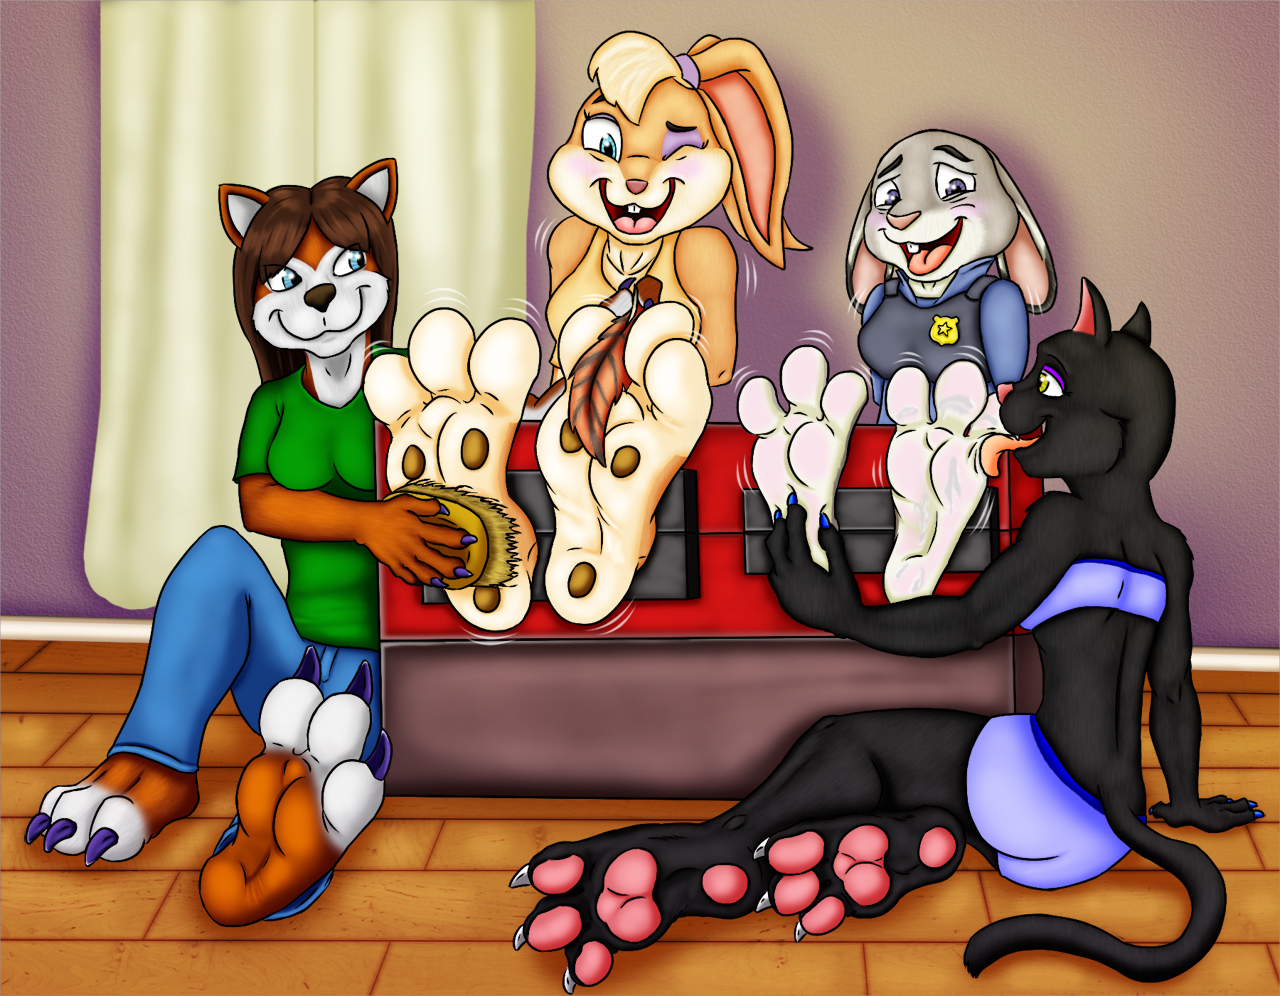 Tickled Bunnies (Commission). 